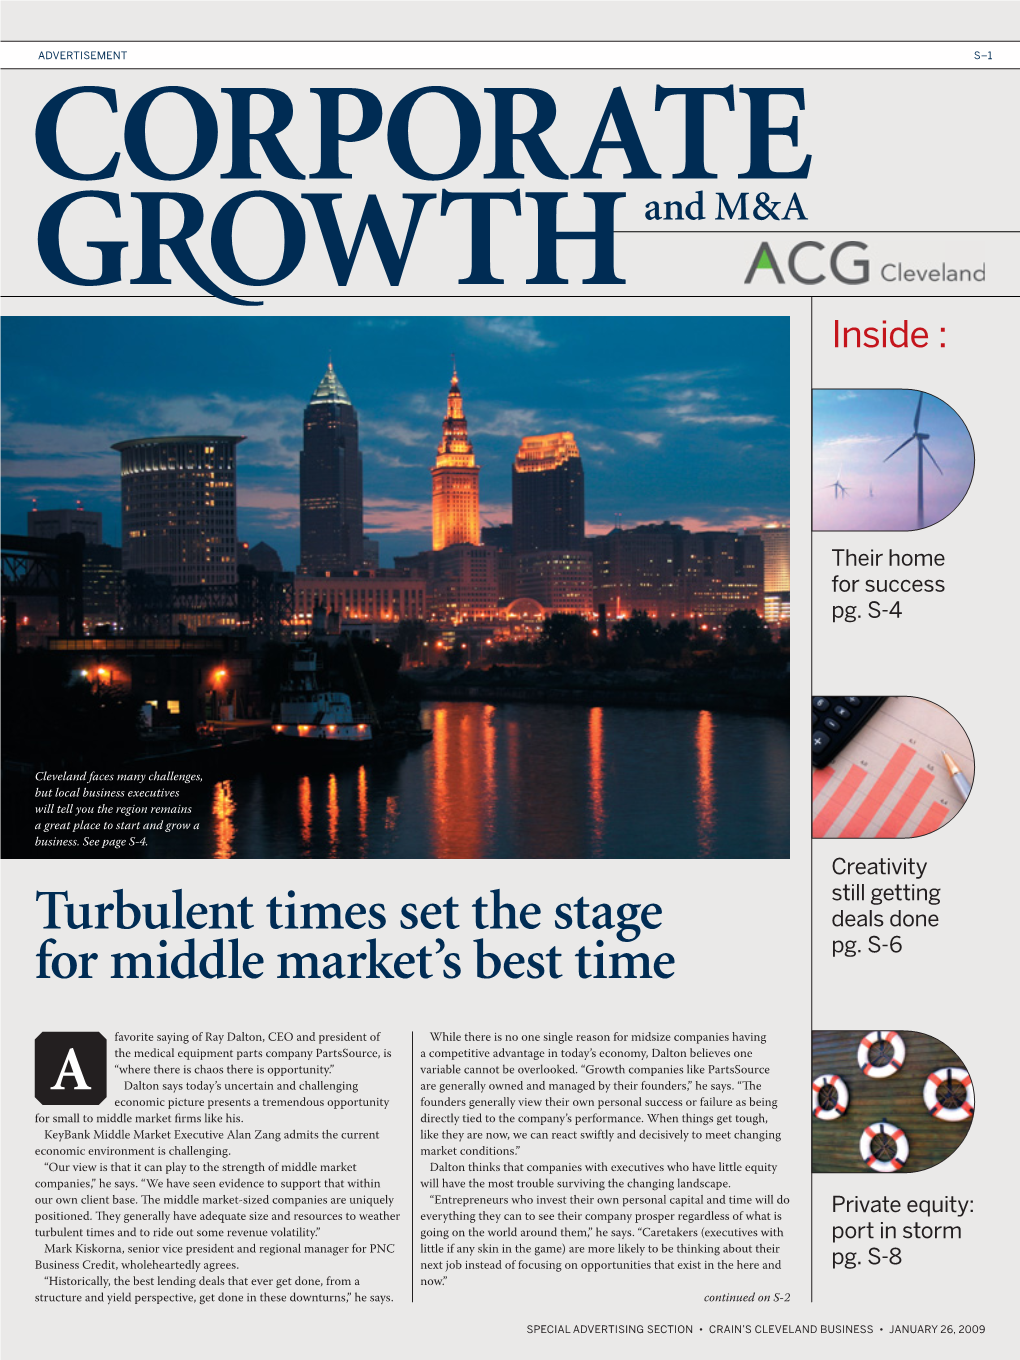 Turbulent Times Set the Stage for Middle Market's Best Time